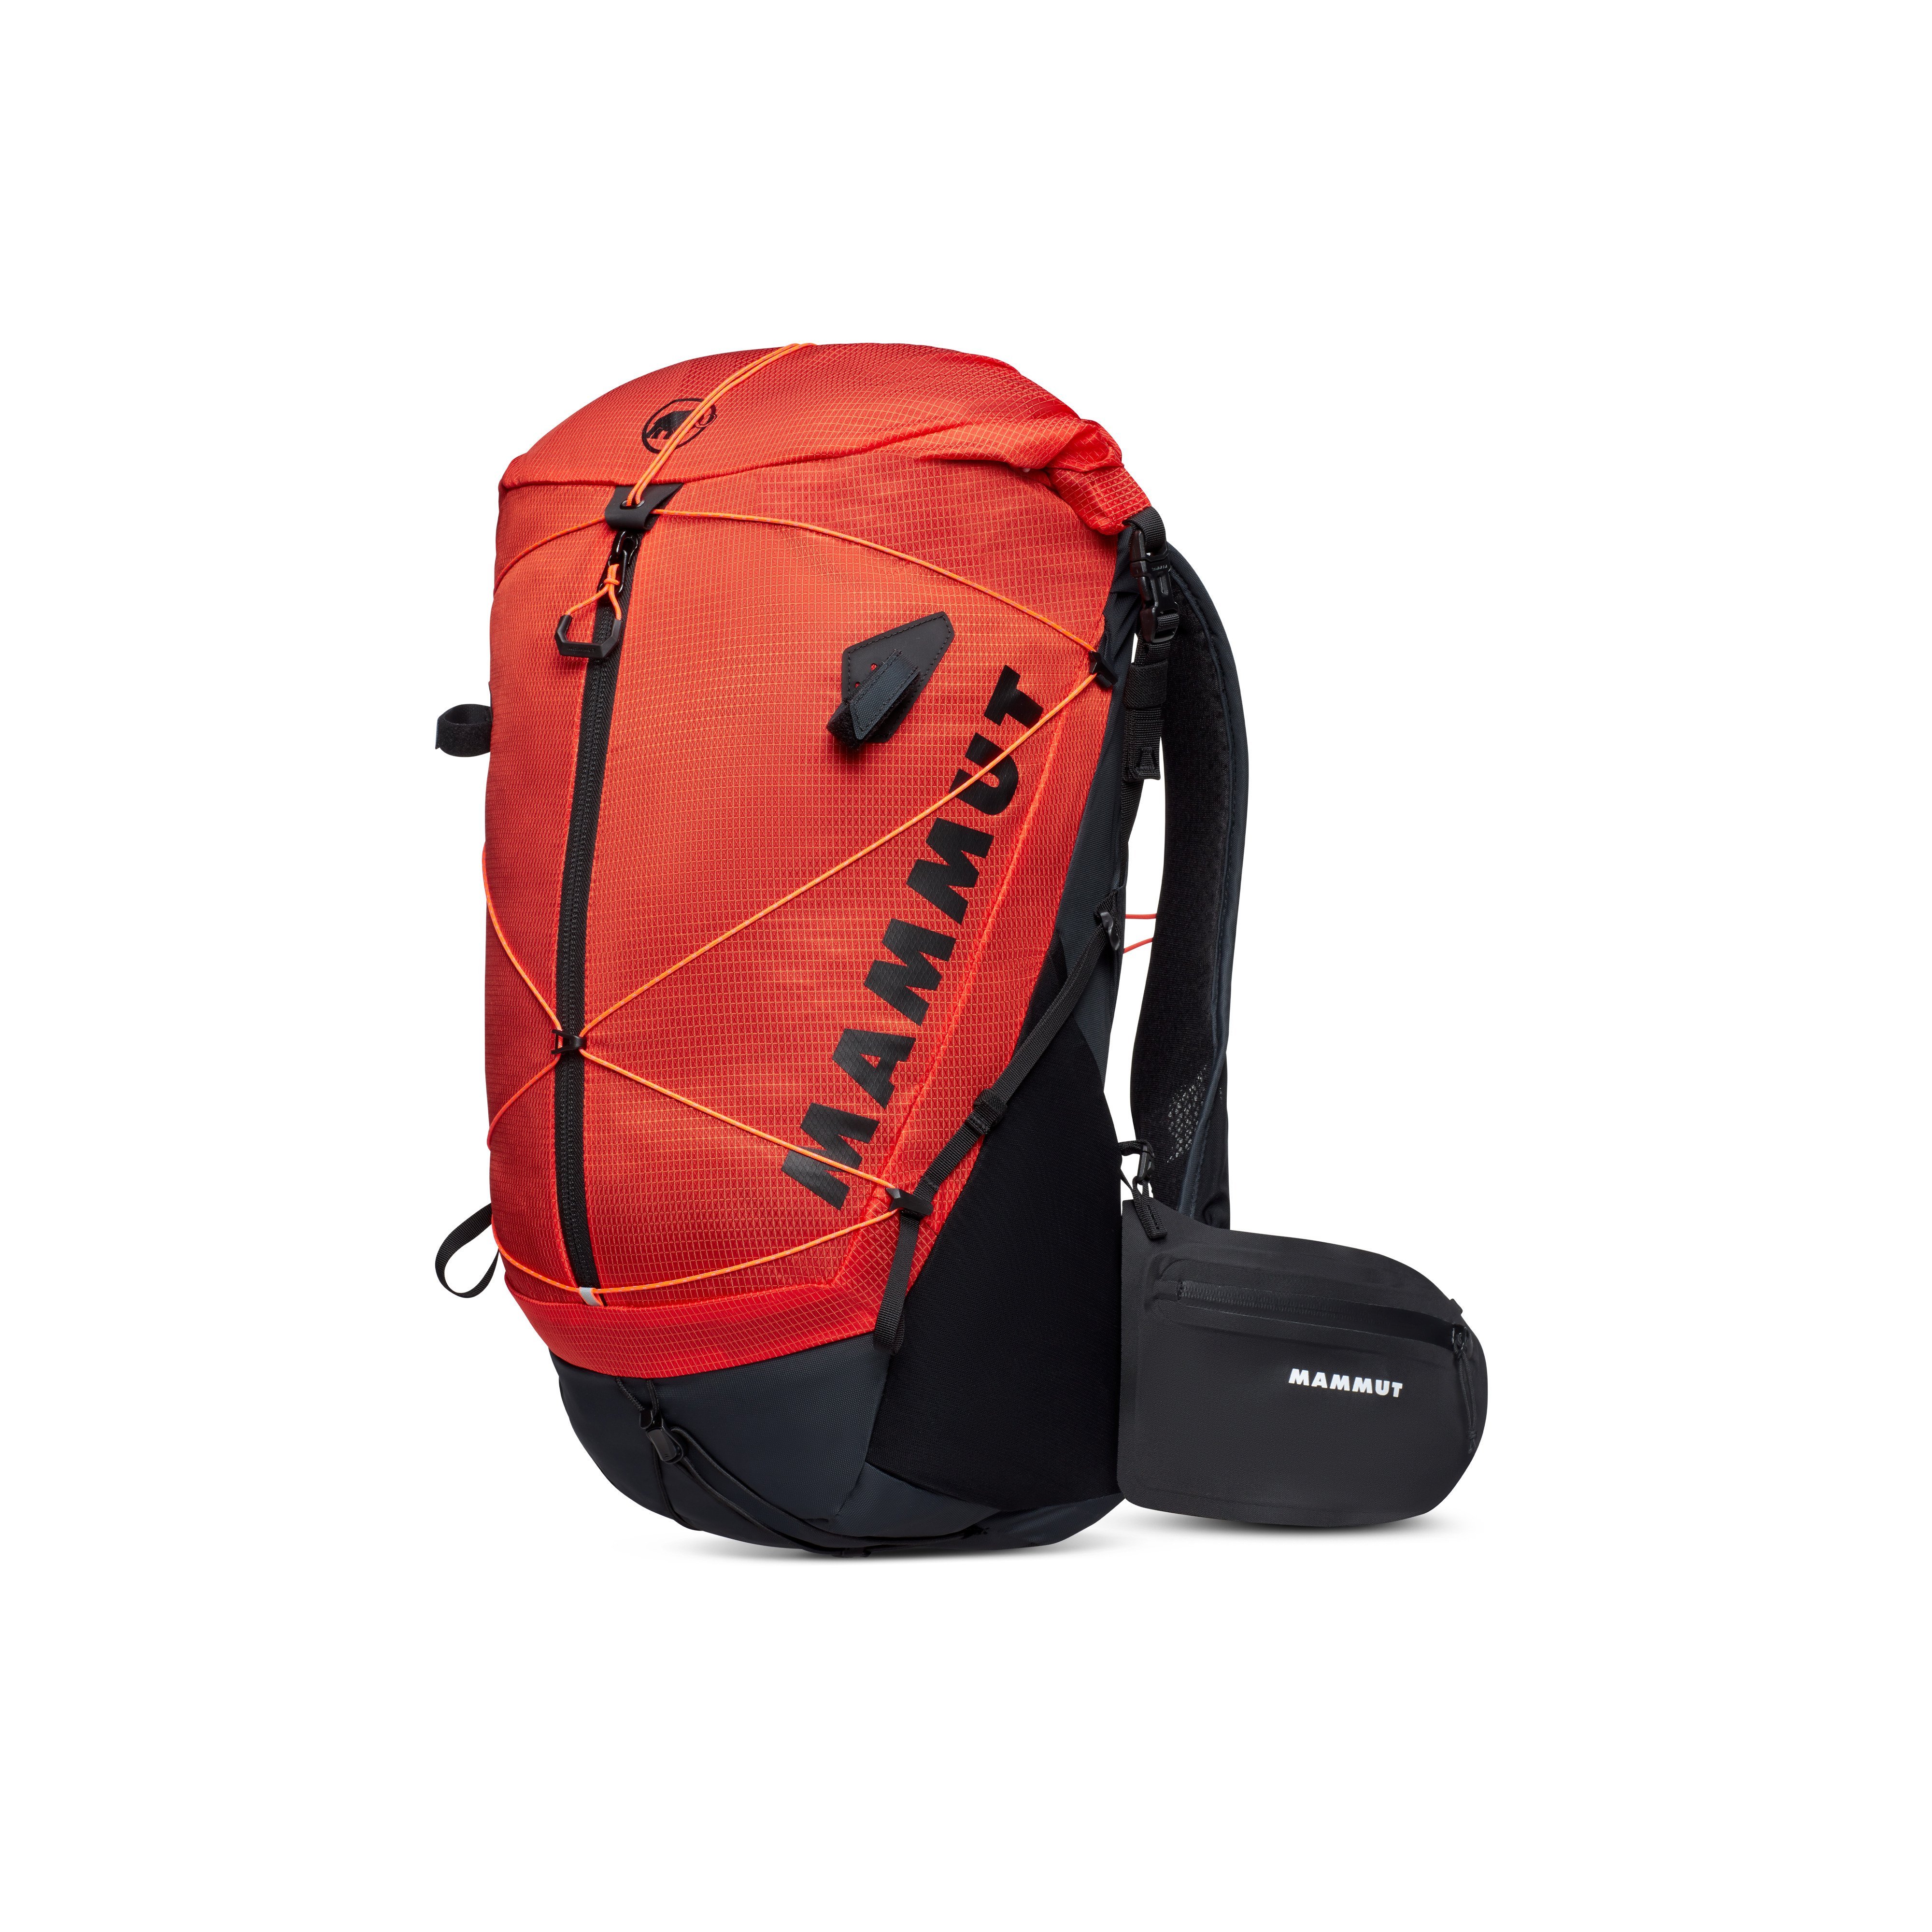 Ducan Spine 28-35 - hot red-black, 28-35 L product image